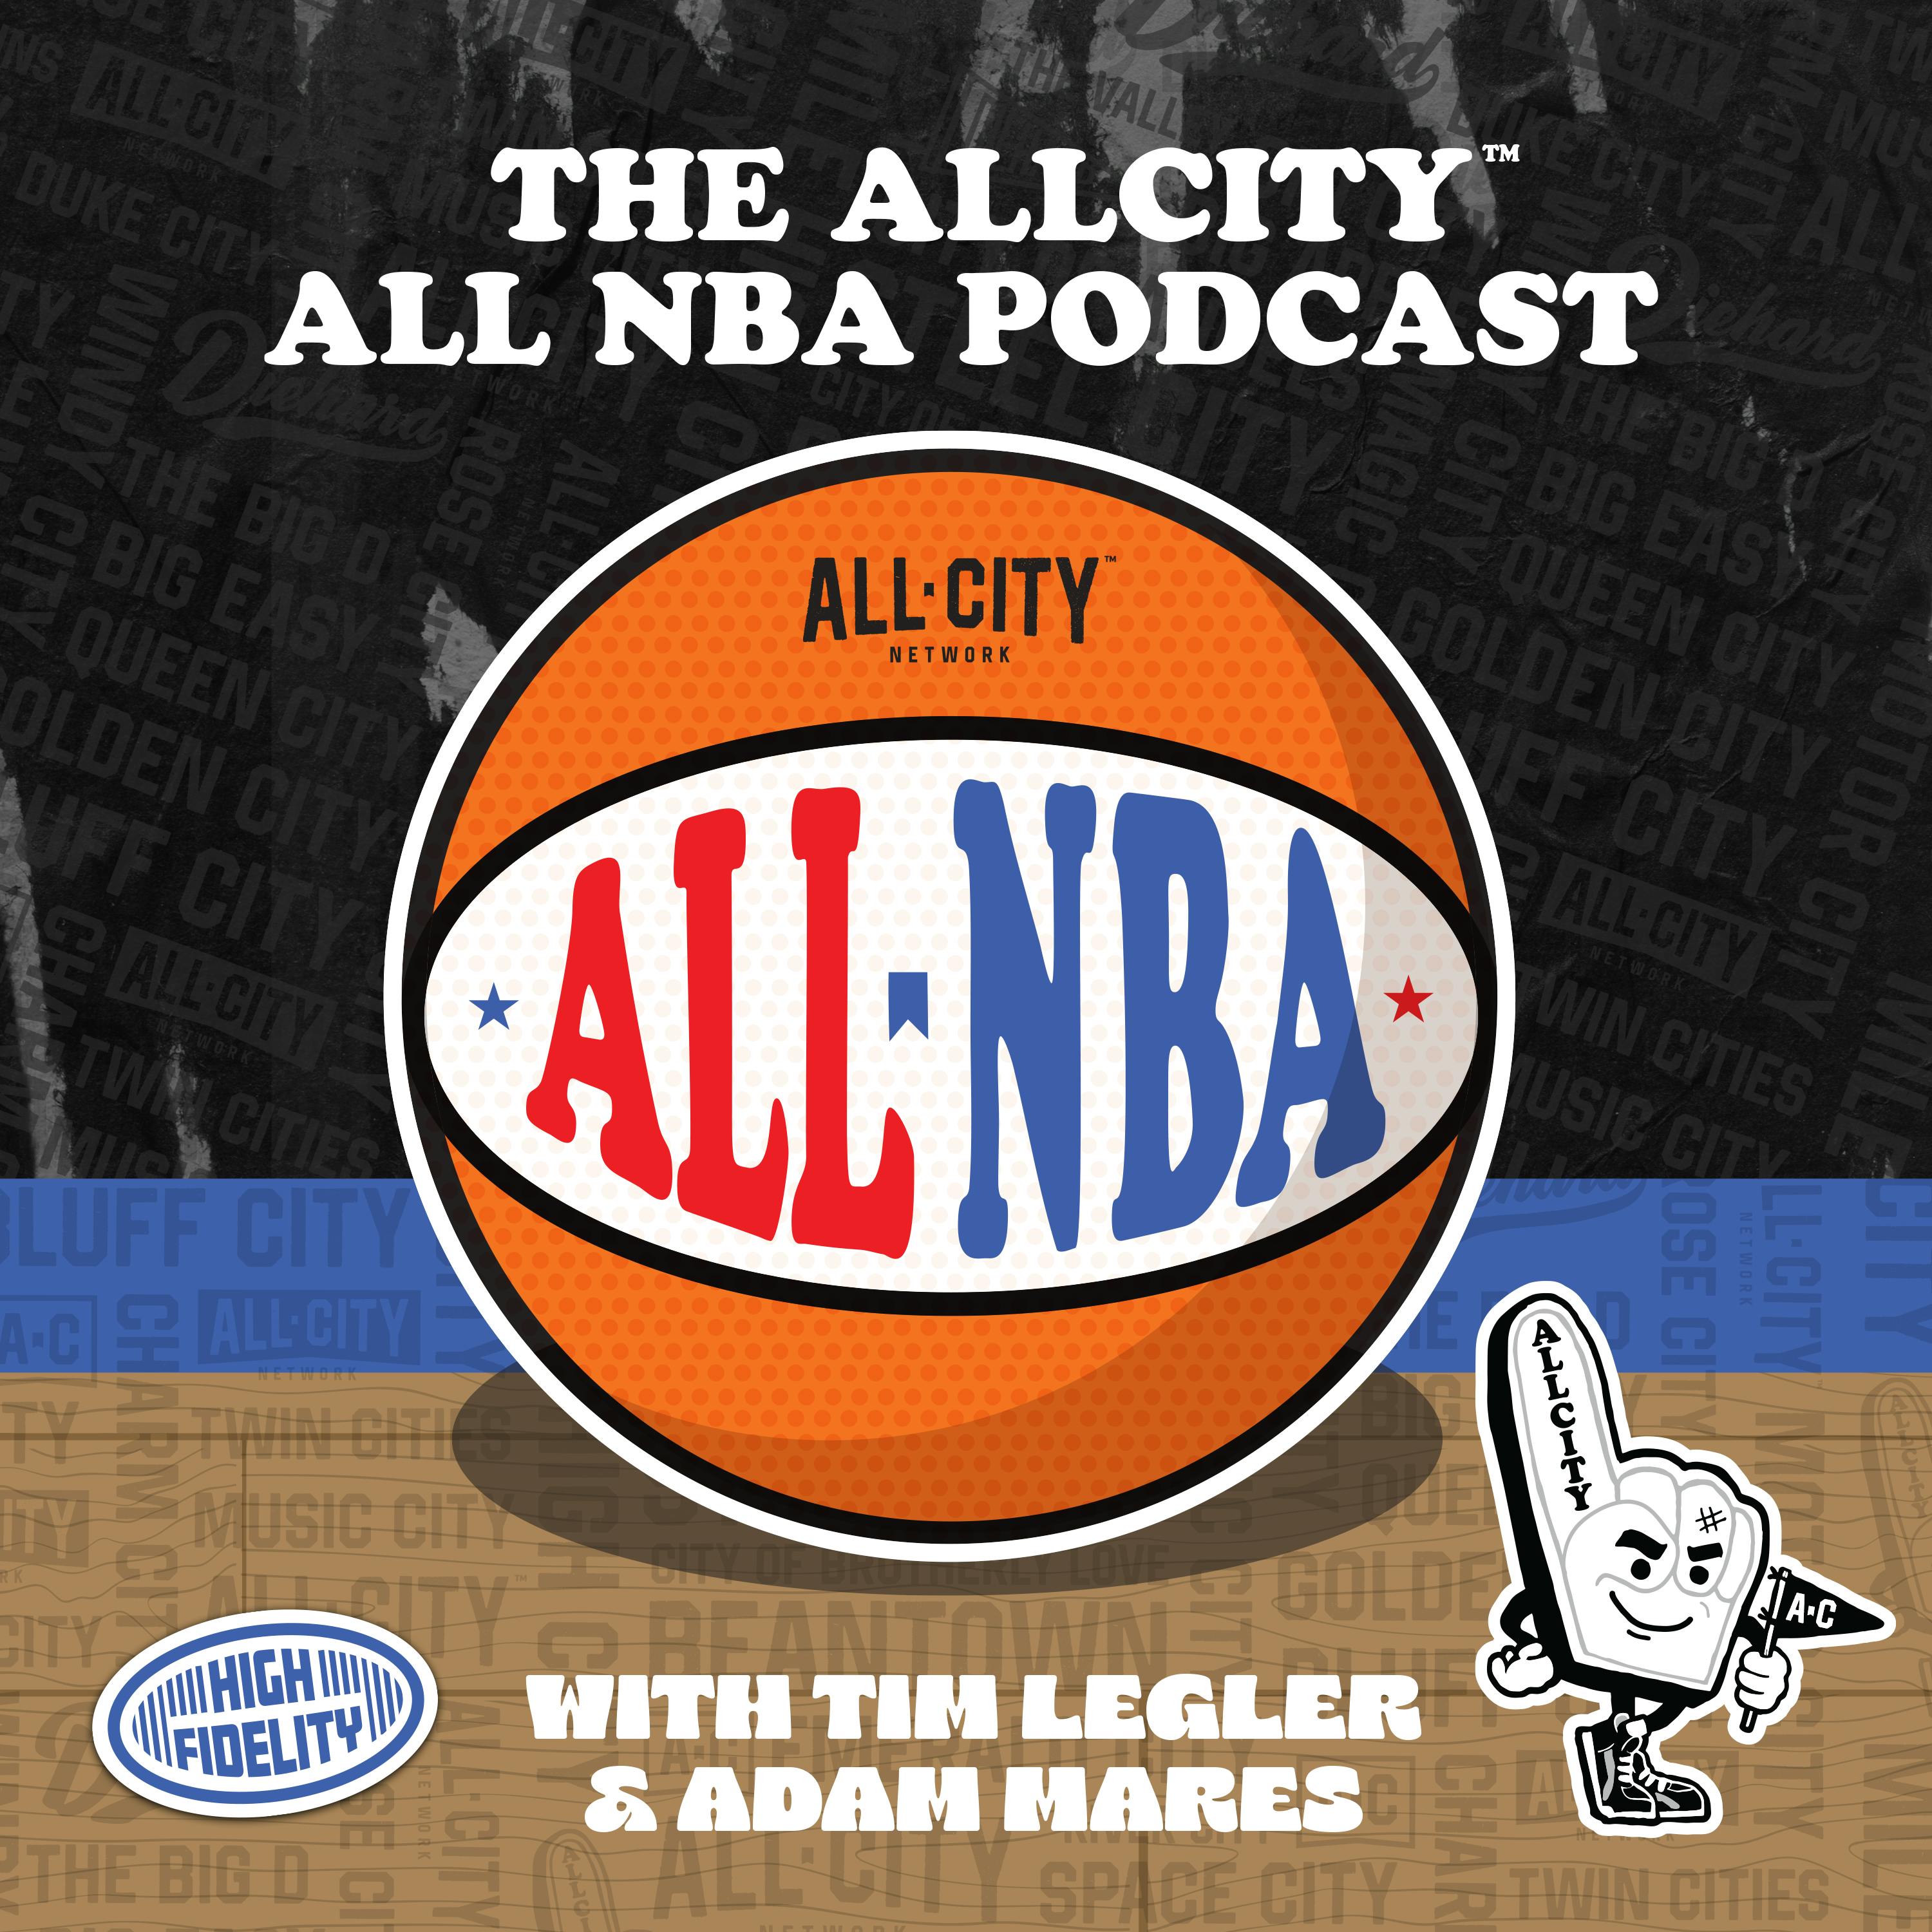 The ALL NBA Podcast: Previewing the matchup between Ant and Jokic & Finishing the 1st Round of the NBA Playoffs